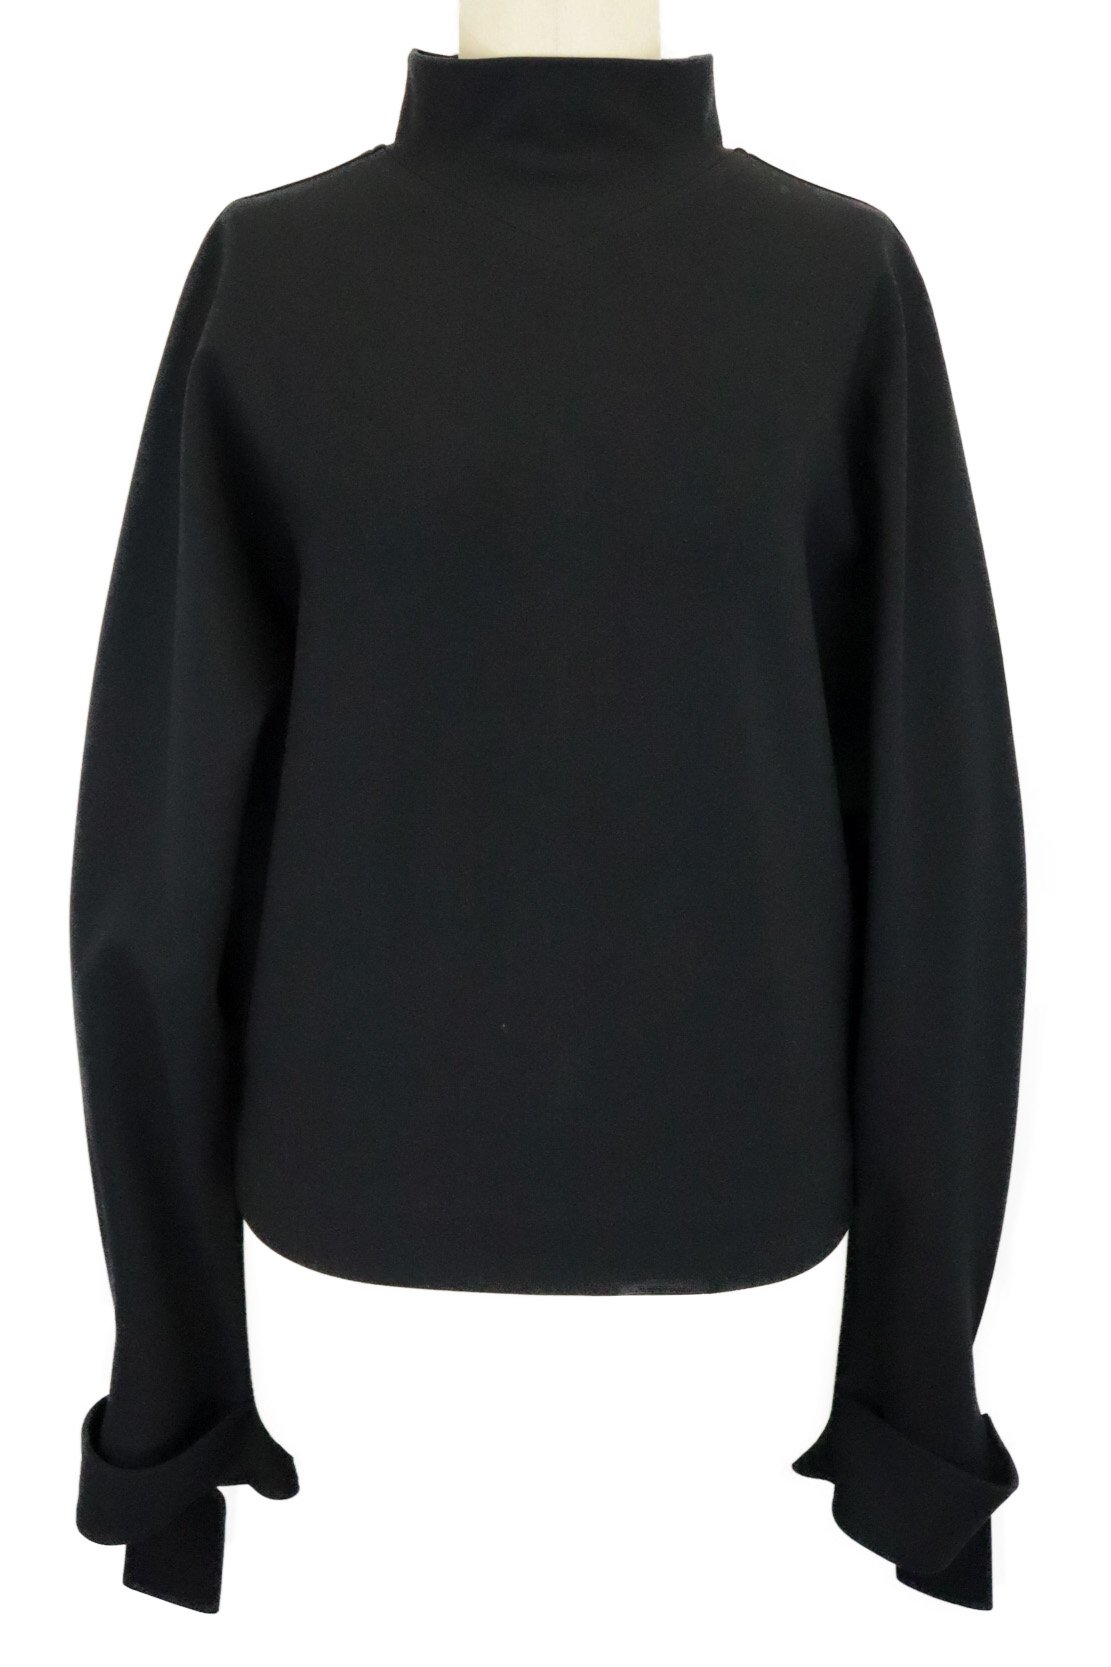 <img class='new_mark_img1' src='https://img.shop-pro.jp/img/new/icons21.gif' style='border:none;display:inline;margin:0px;padding:0px;width:auto;' />【30%OFF】VICTORIA BECKHAM Turtle jersey tops (BLACK)